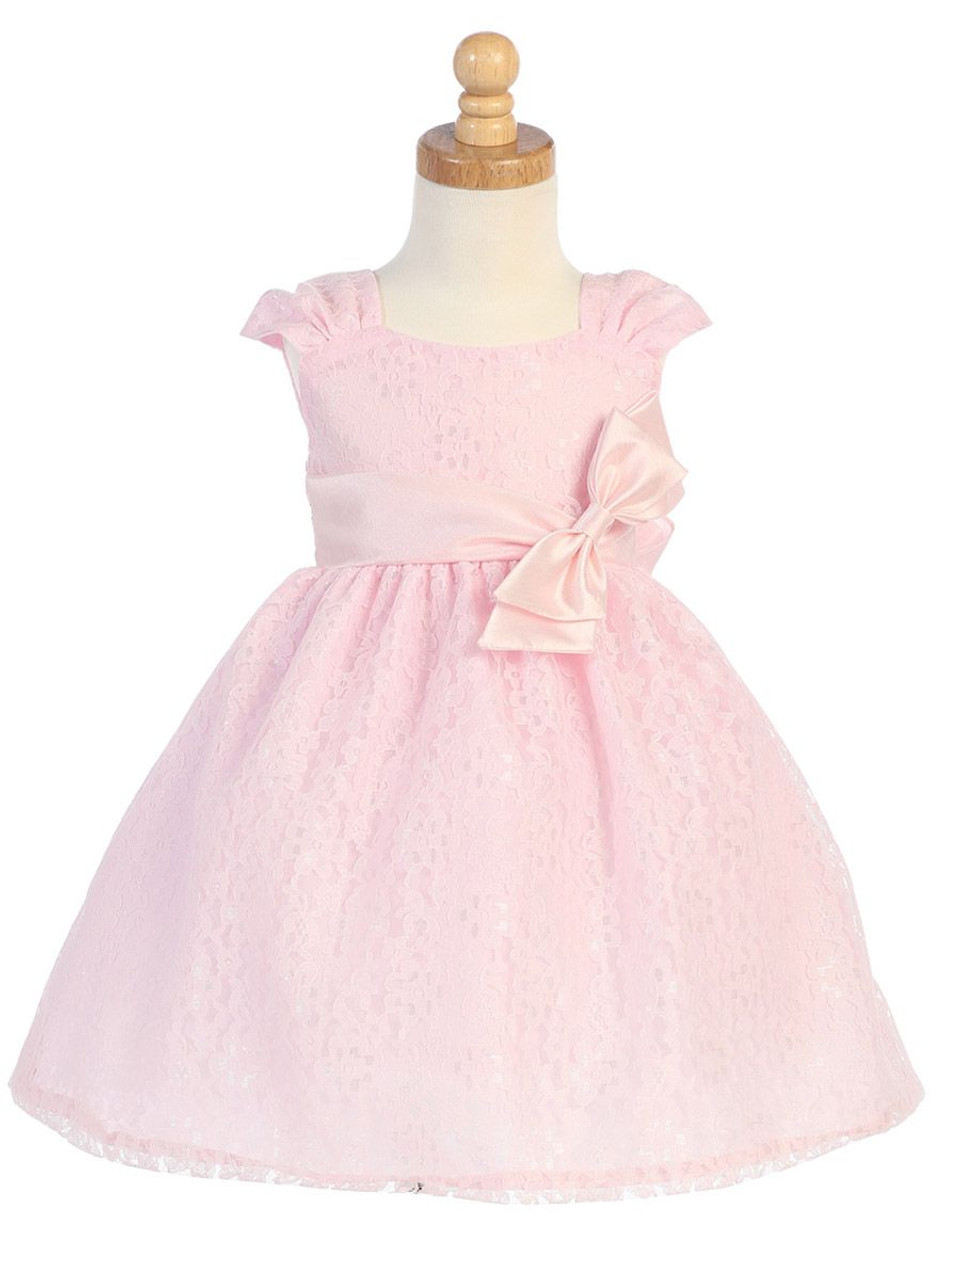 Pink Embroidered Tulle Dress w/ Bow - Pink Princess